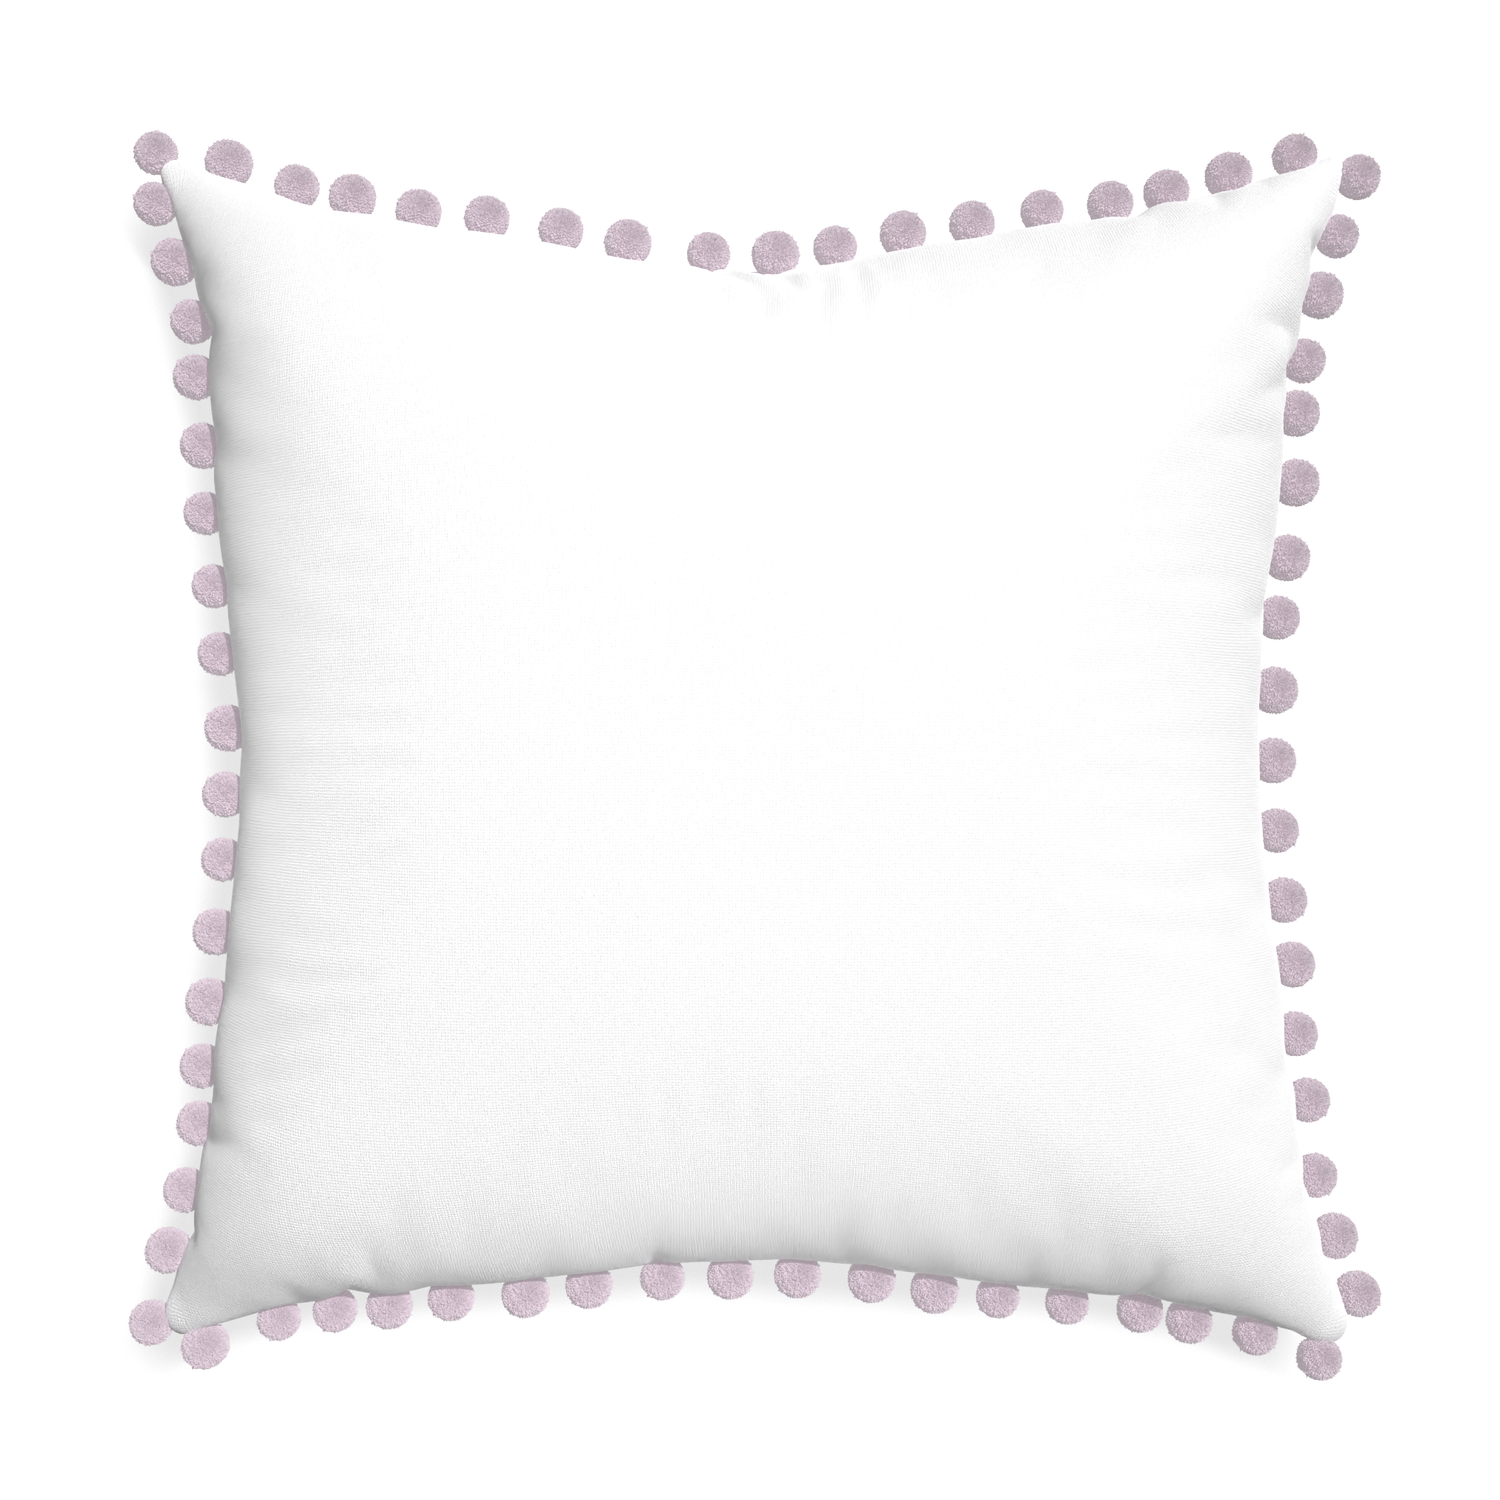 Euro-sham snow custom pillow with l on white background